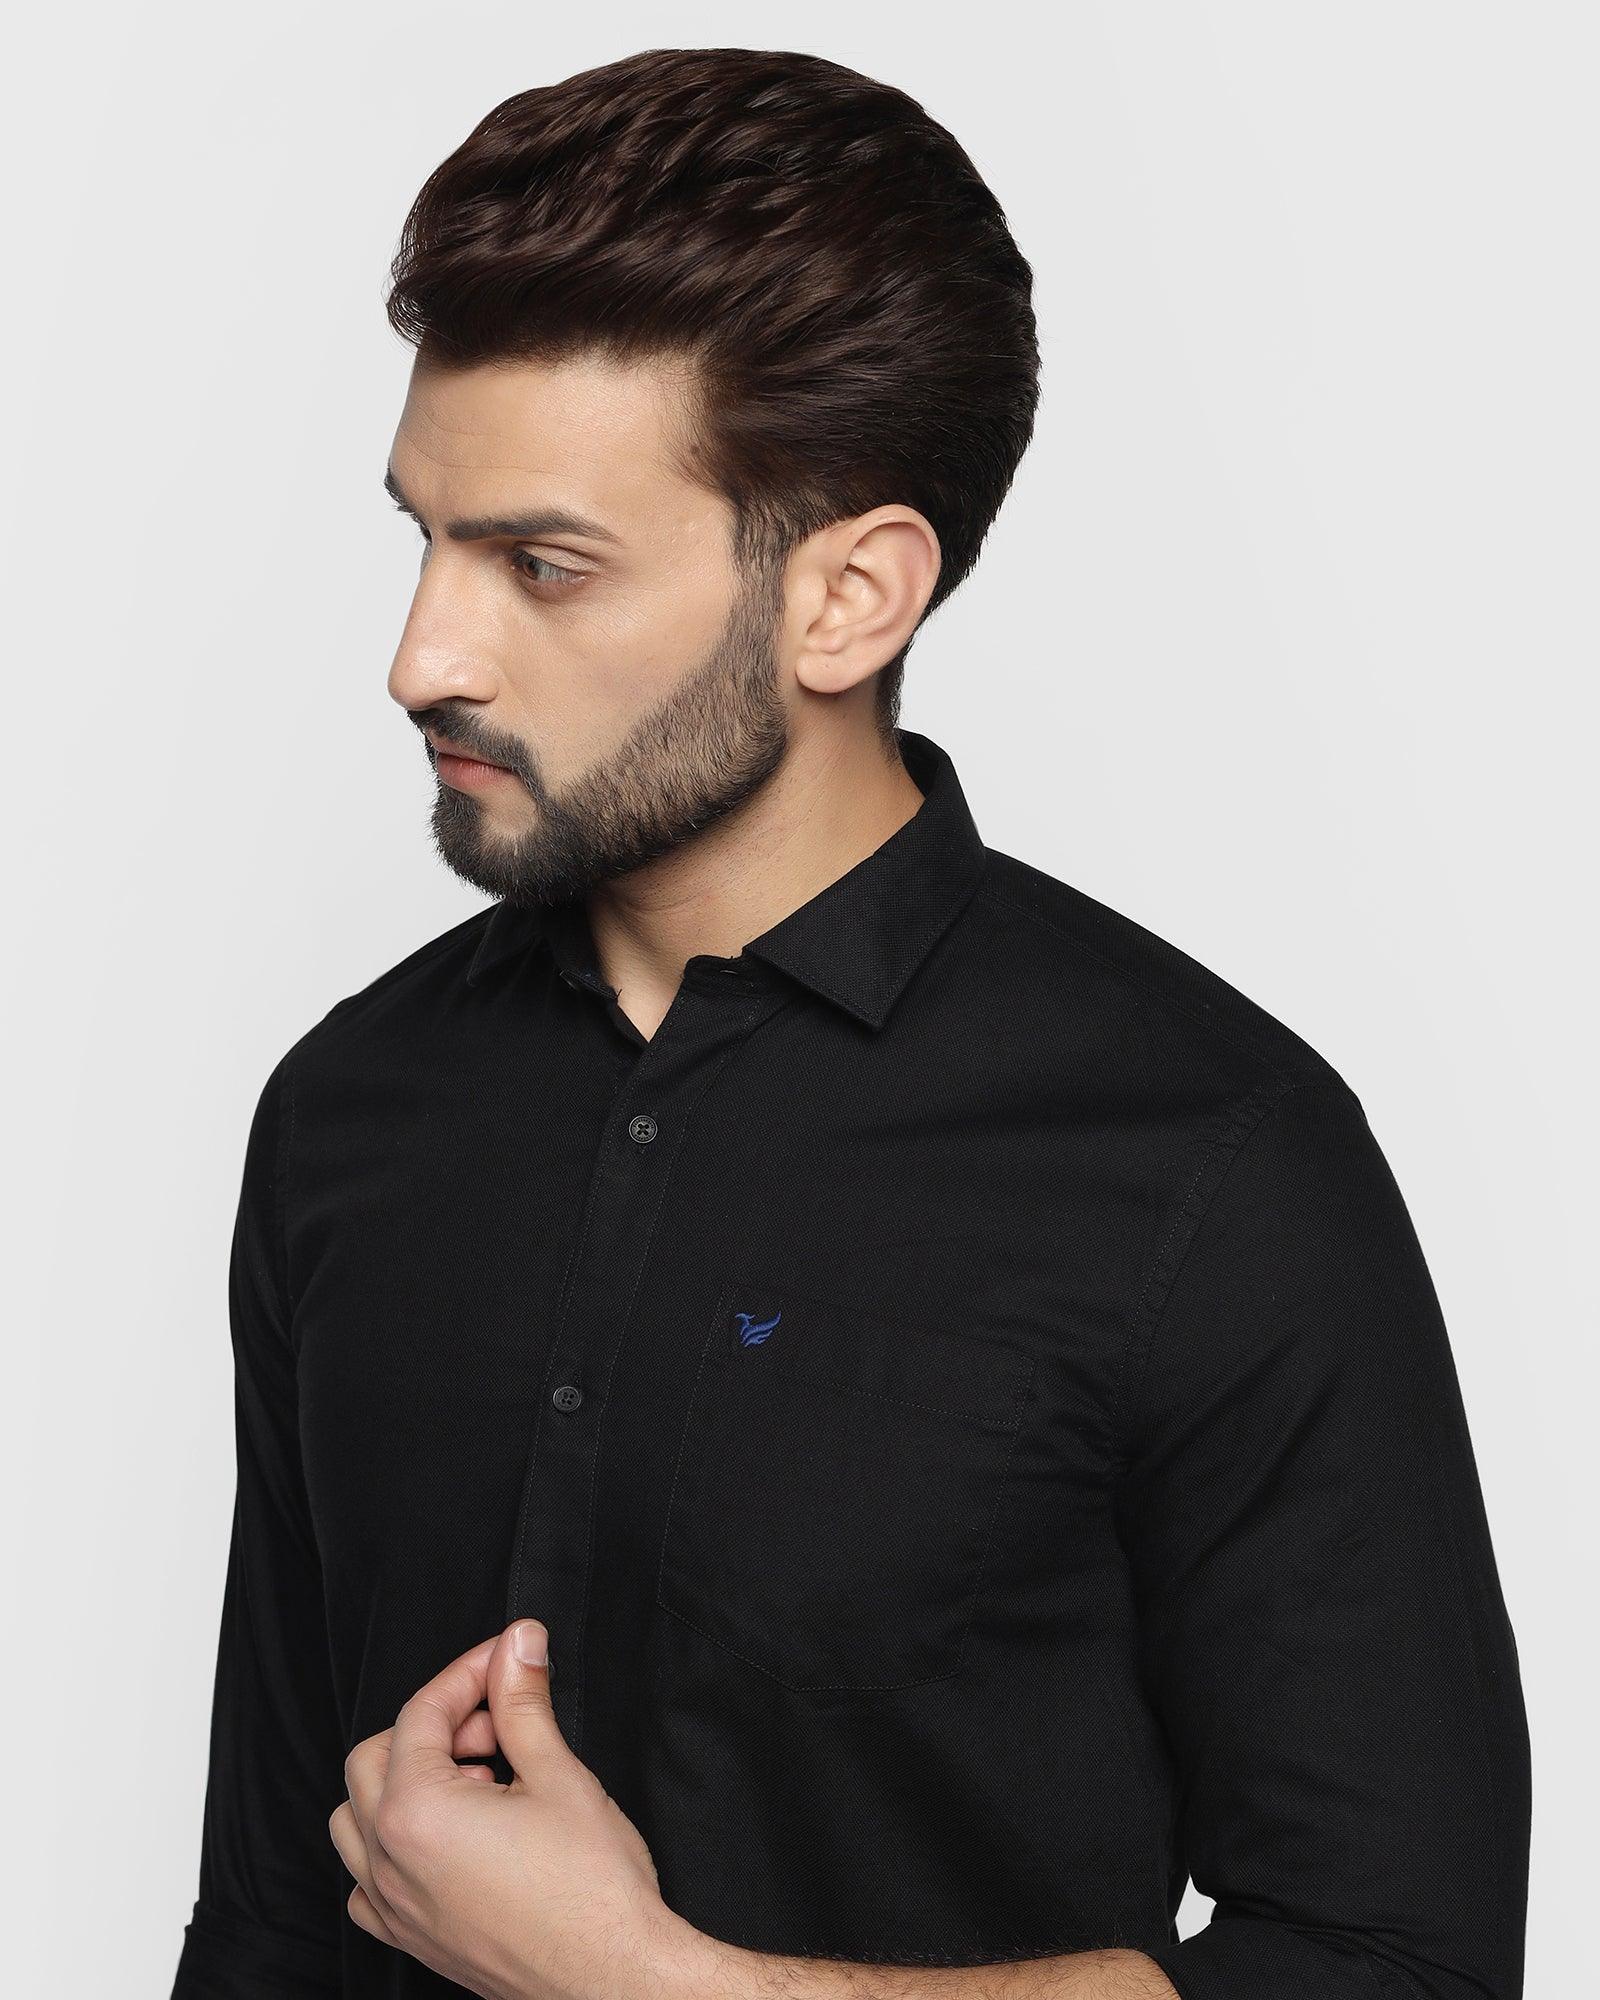 Casual Black Solid Shirt - Lure